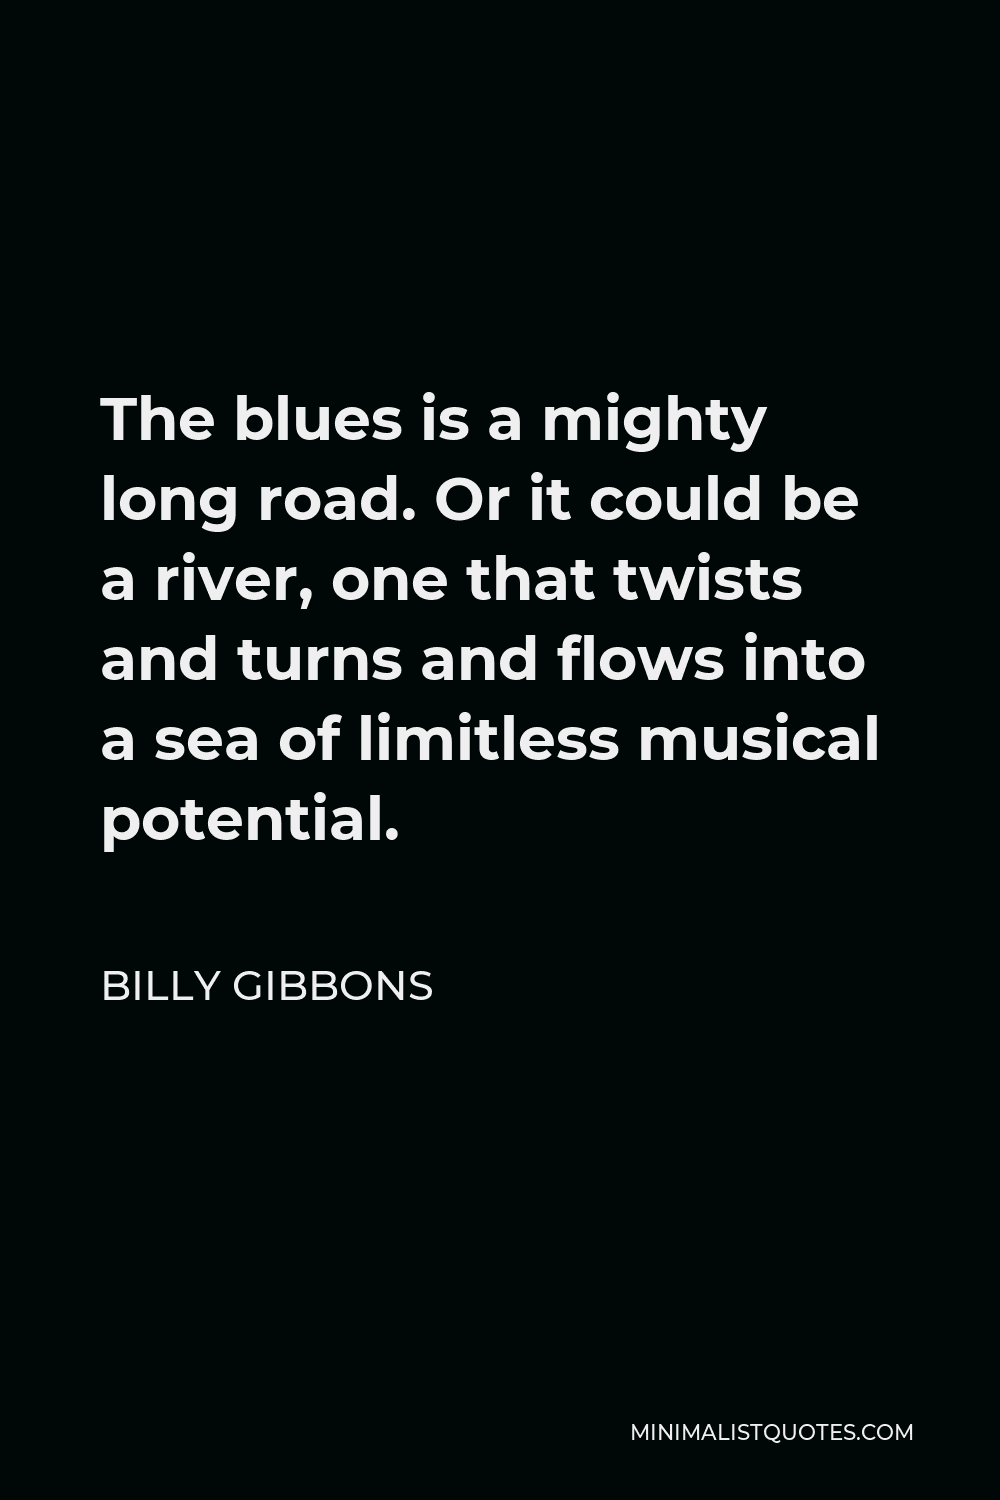 Billy Gibbons Quote - The blues is a mighty long road. Or it could be a river, one that twists and turns and flows into a sea of limitless musical potential.